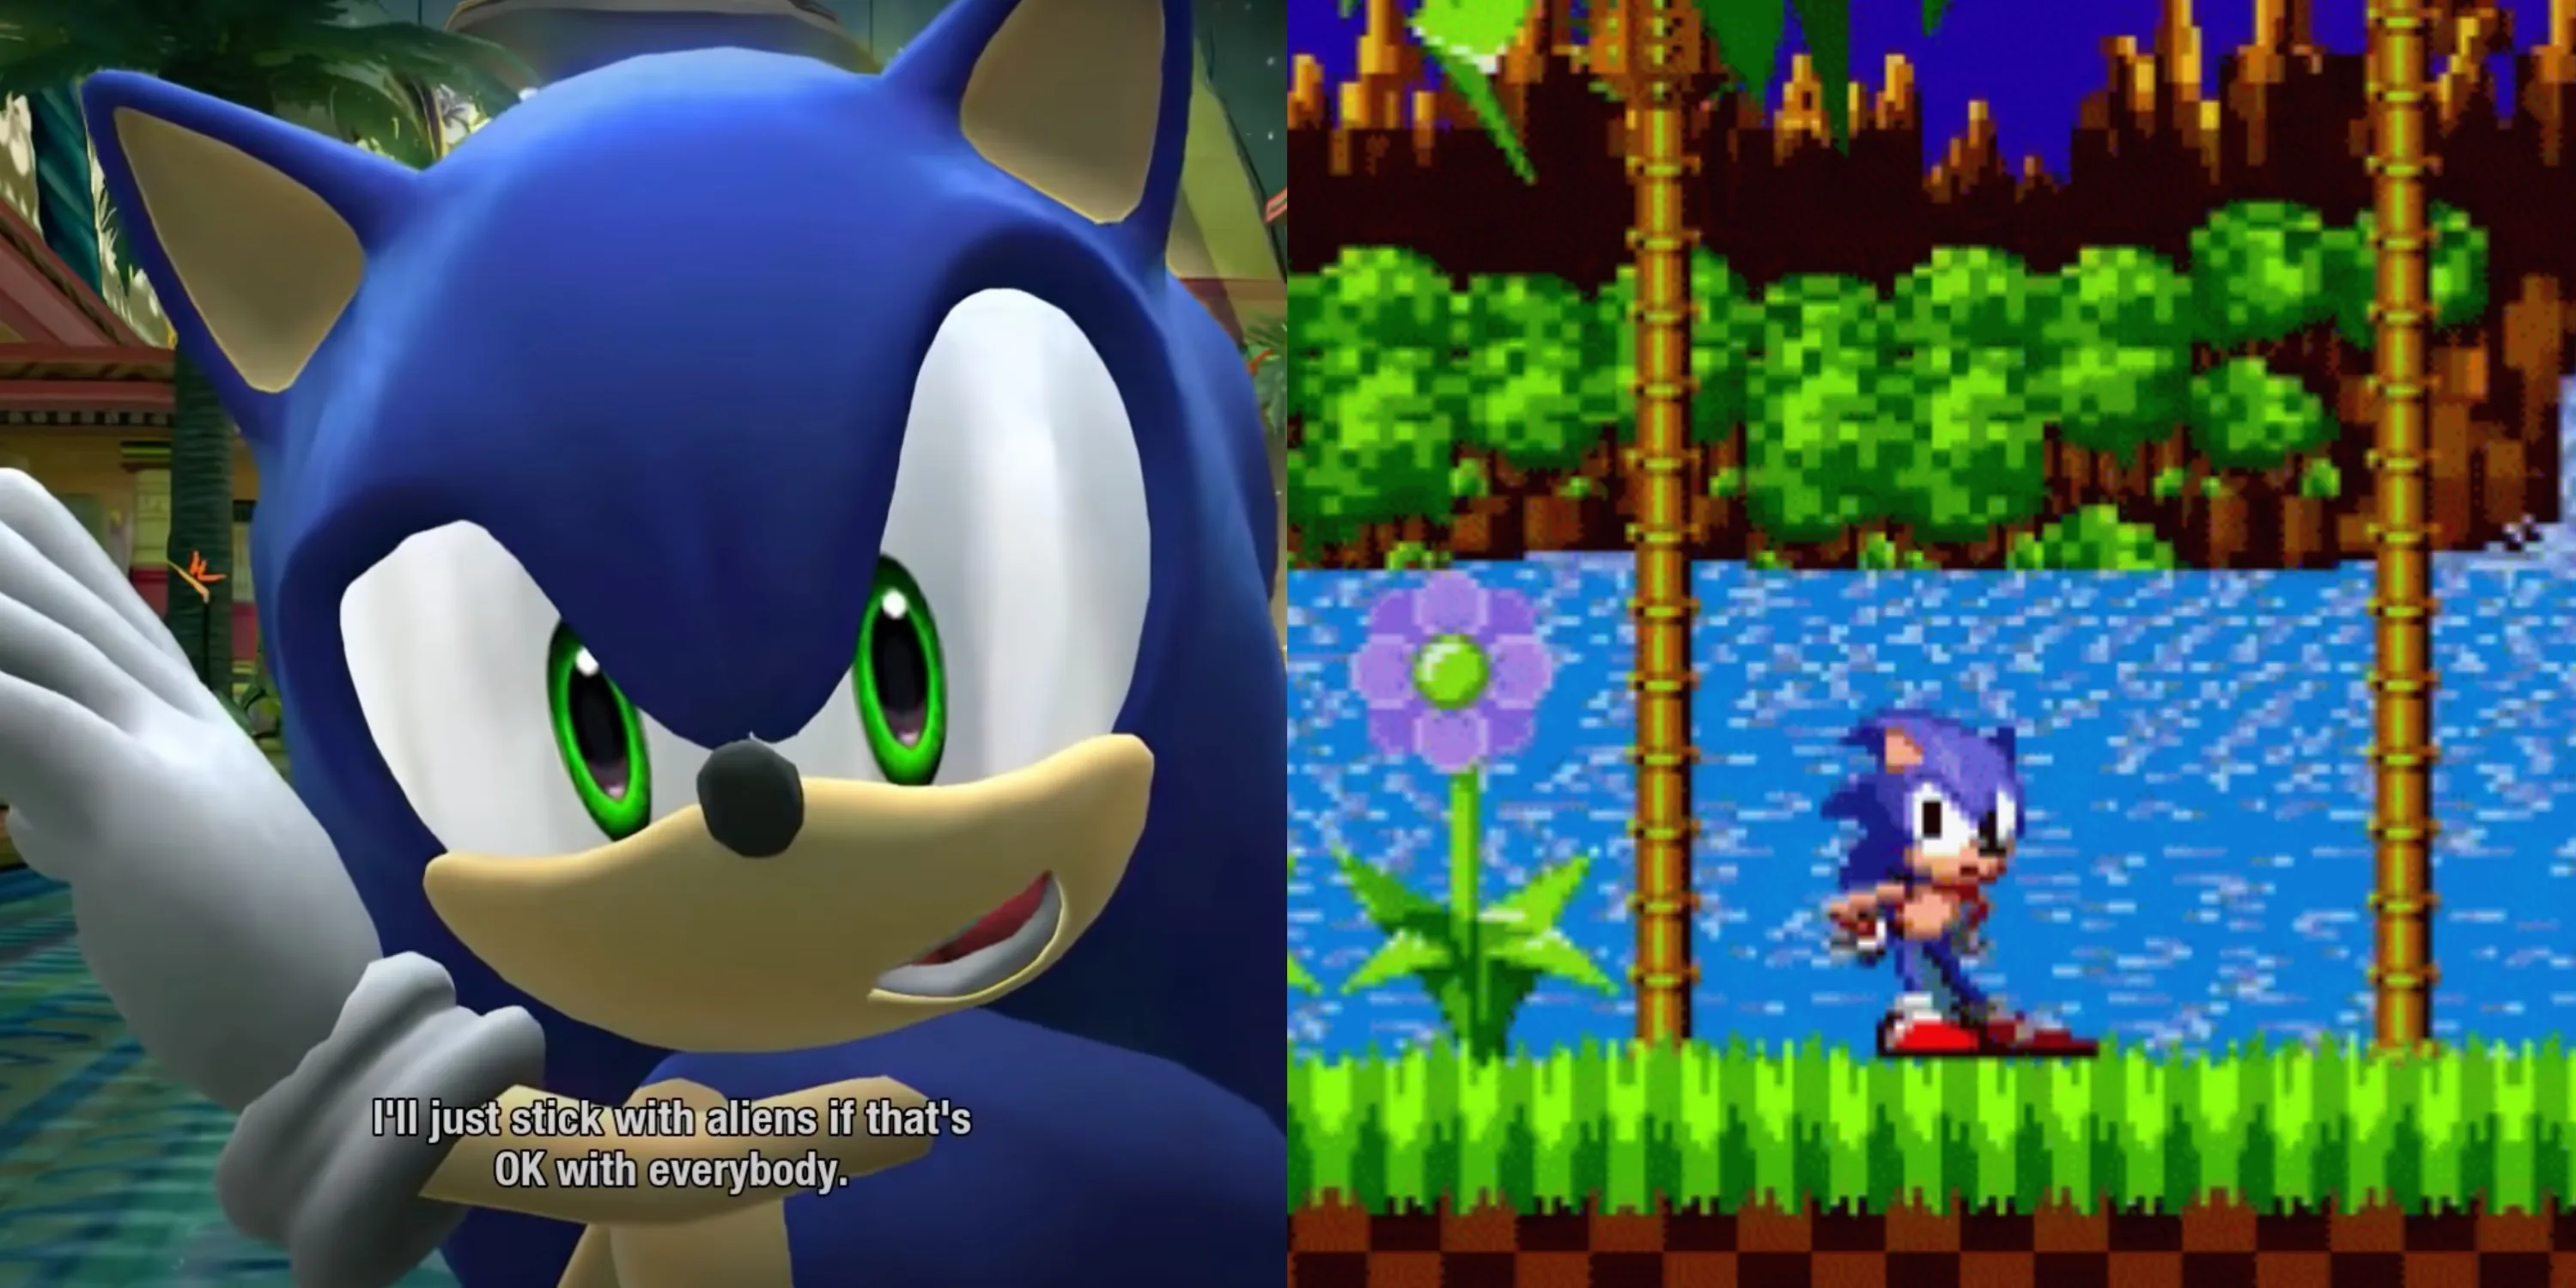 sonic breaking the 4th wall in sonic colors, and sonic tapping his foot and looking irritated at the player in the classic game